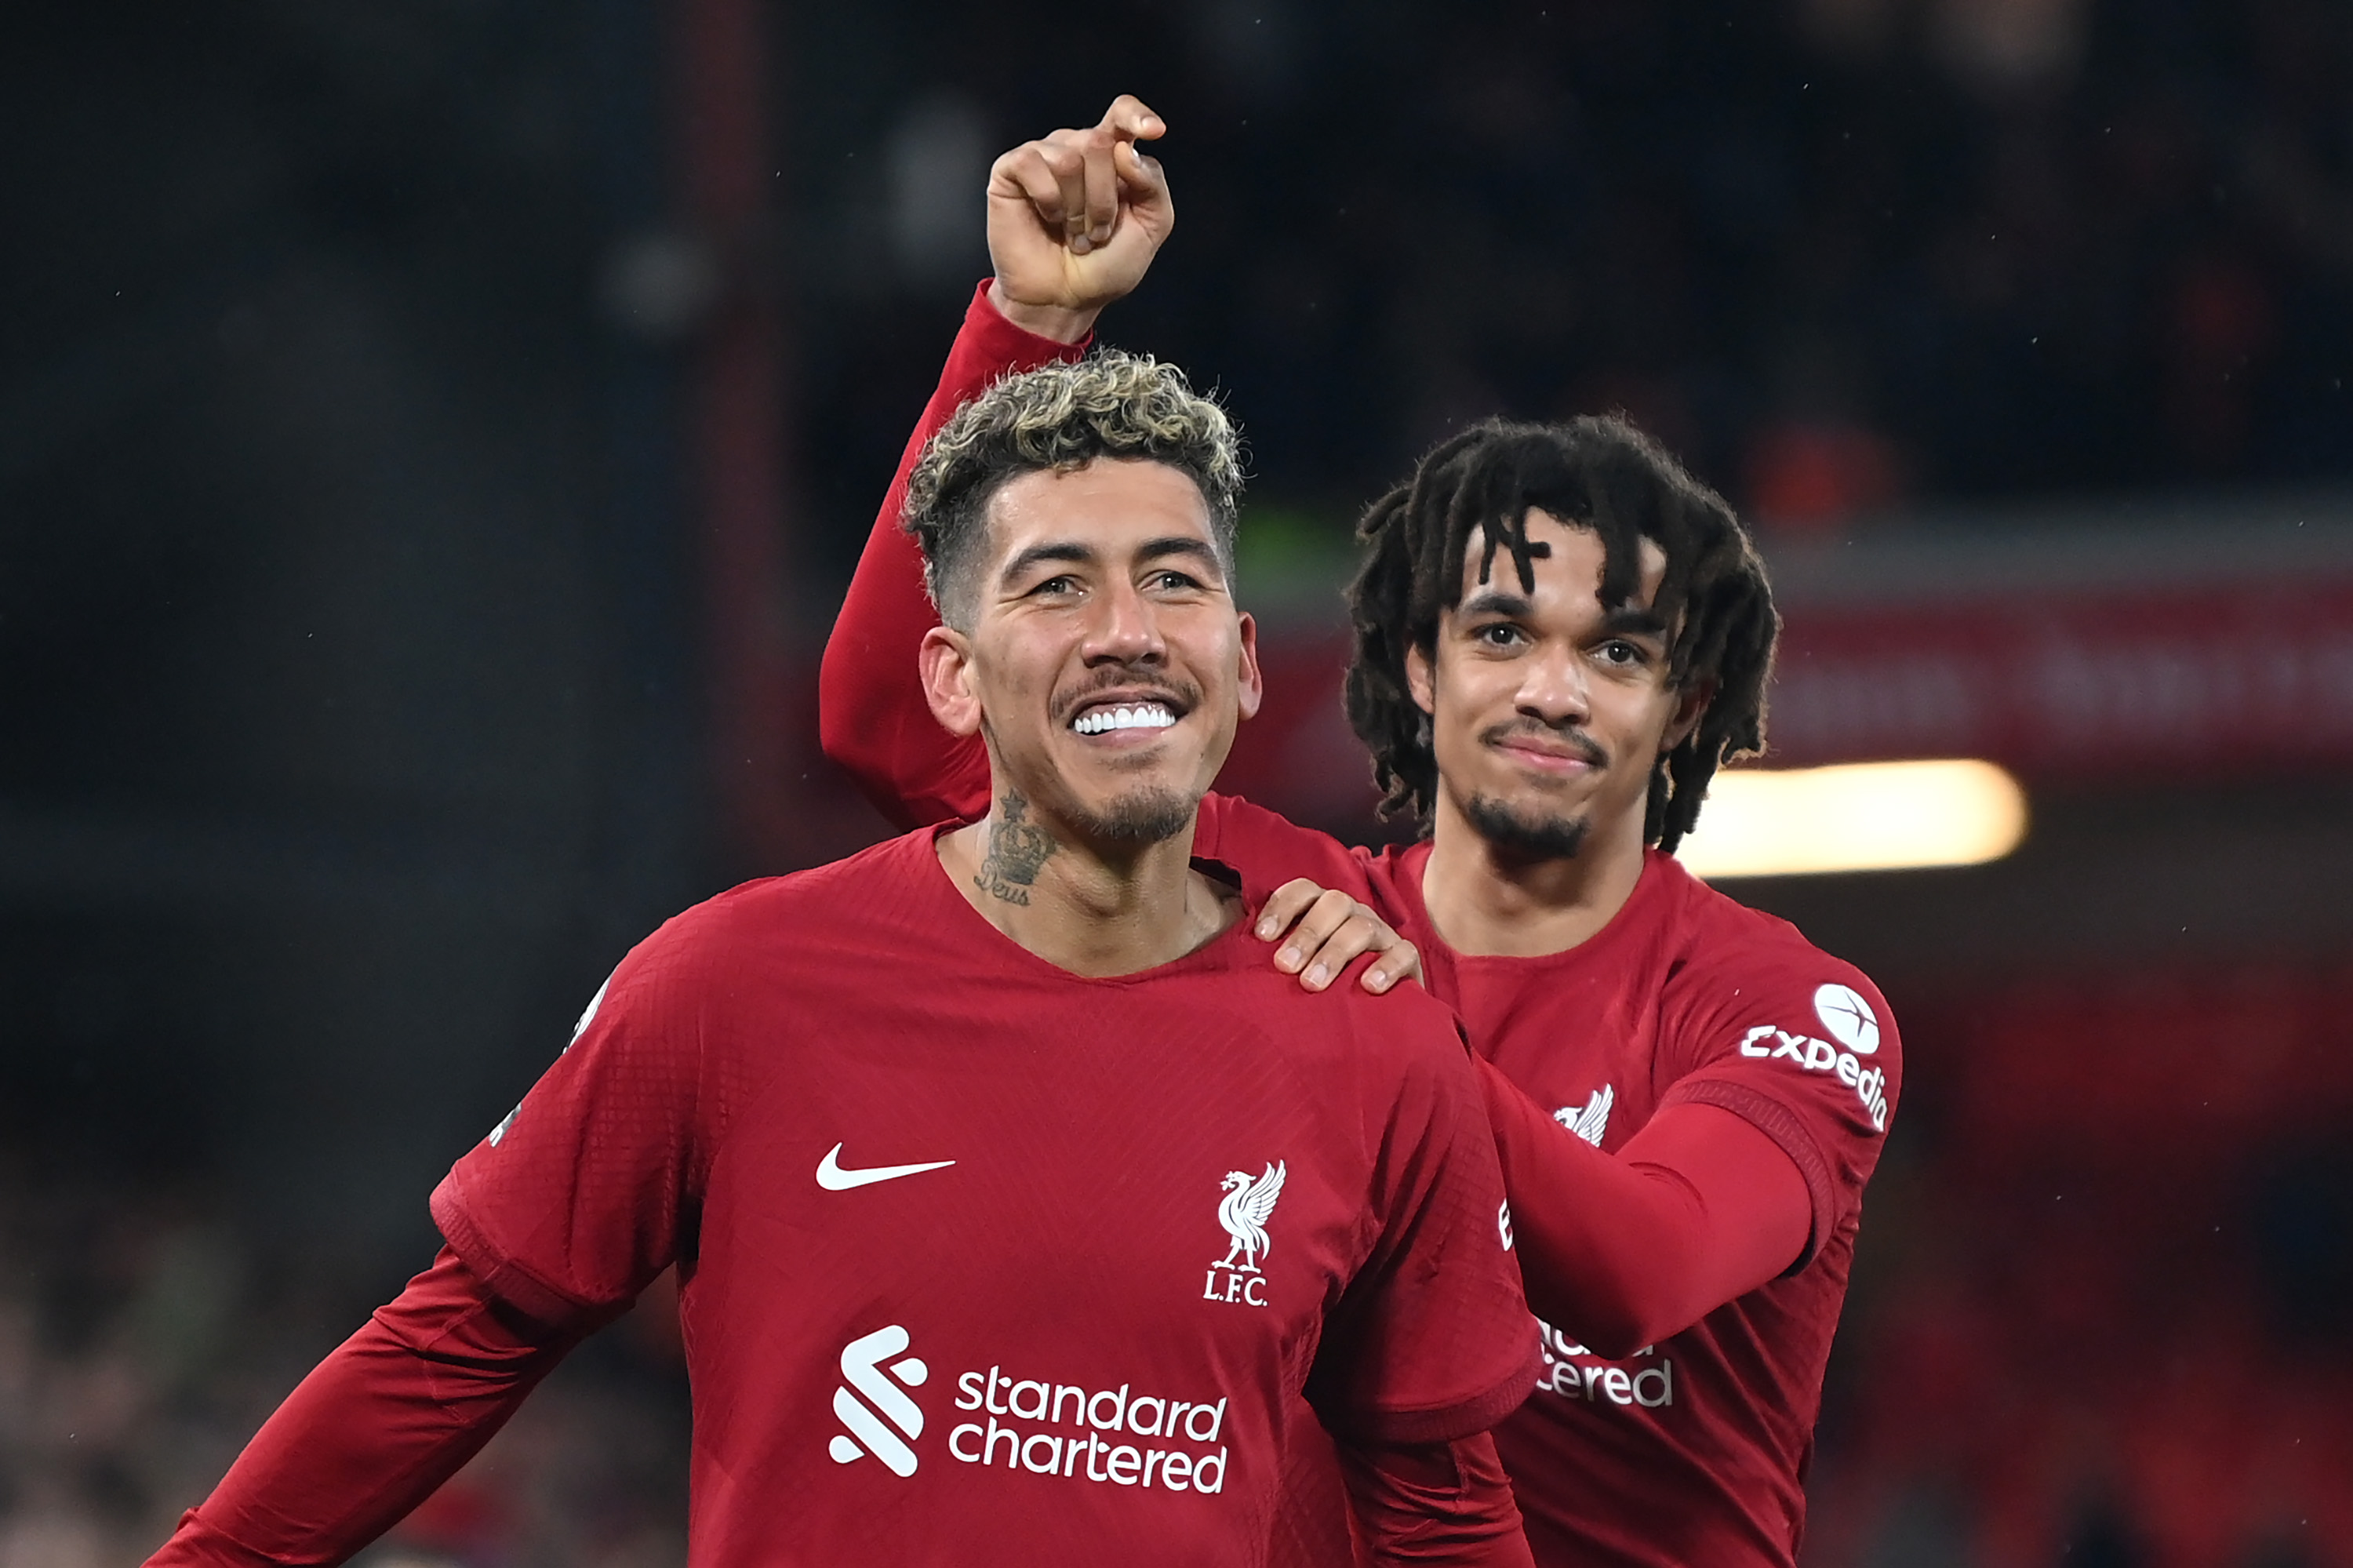 Roberto Firmino of Liverpool celebrates after scoring the team’s seventh goal with teammate Trent Alexander-Arnold during the Premier League match between Liverpool FC and Manchester United at Anfield on March 05, 2023 in Liverpool, England.